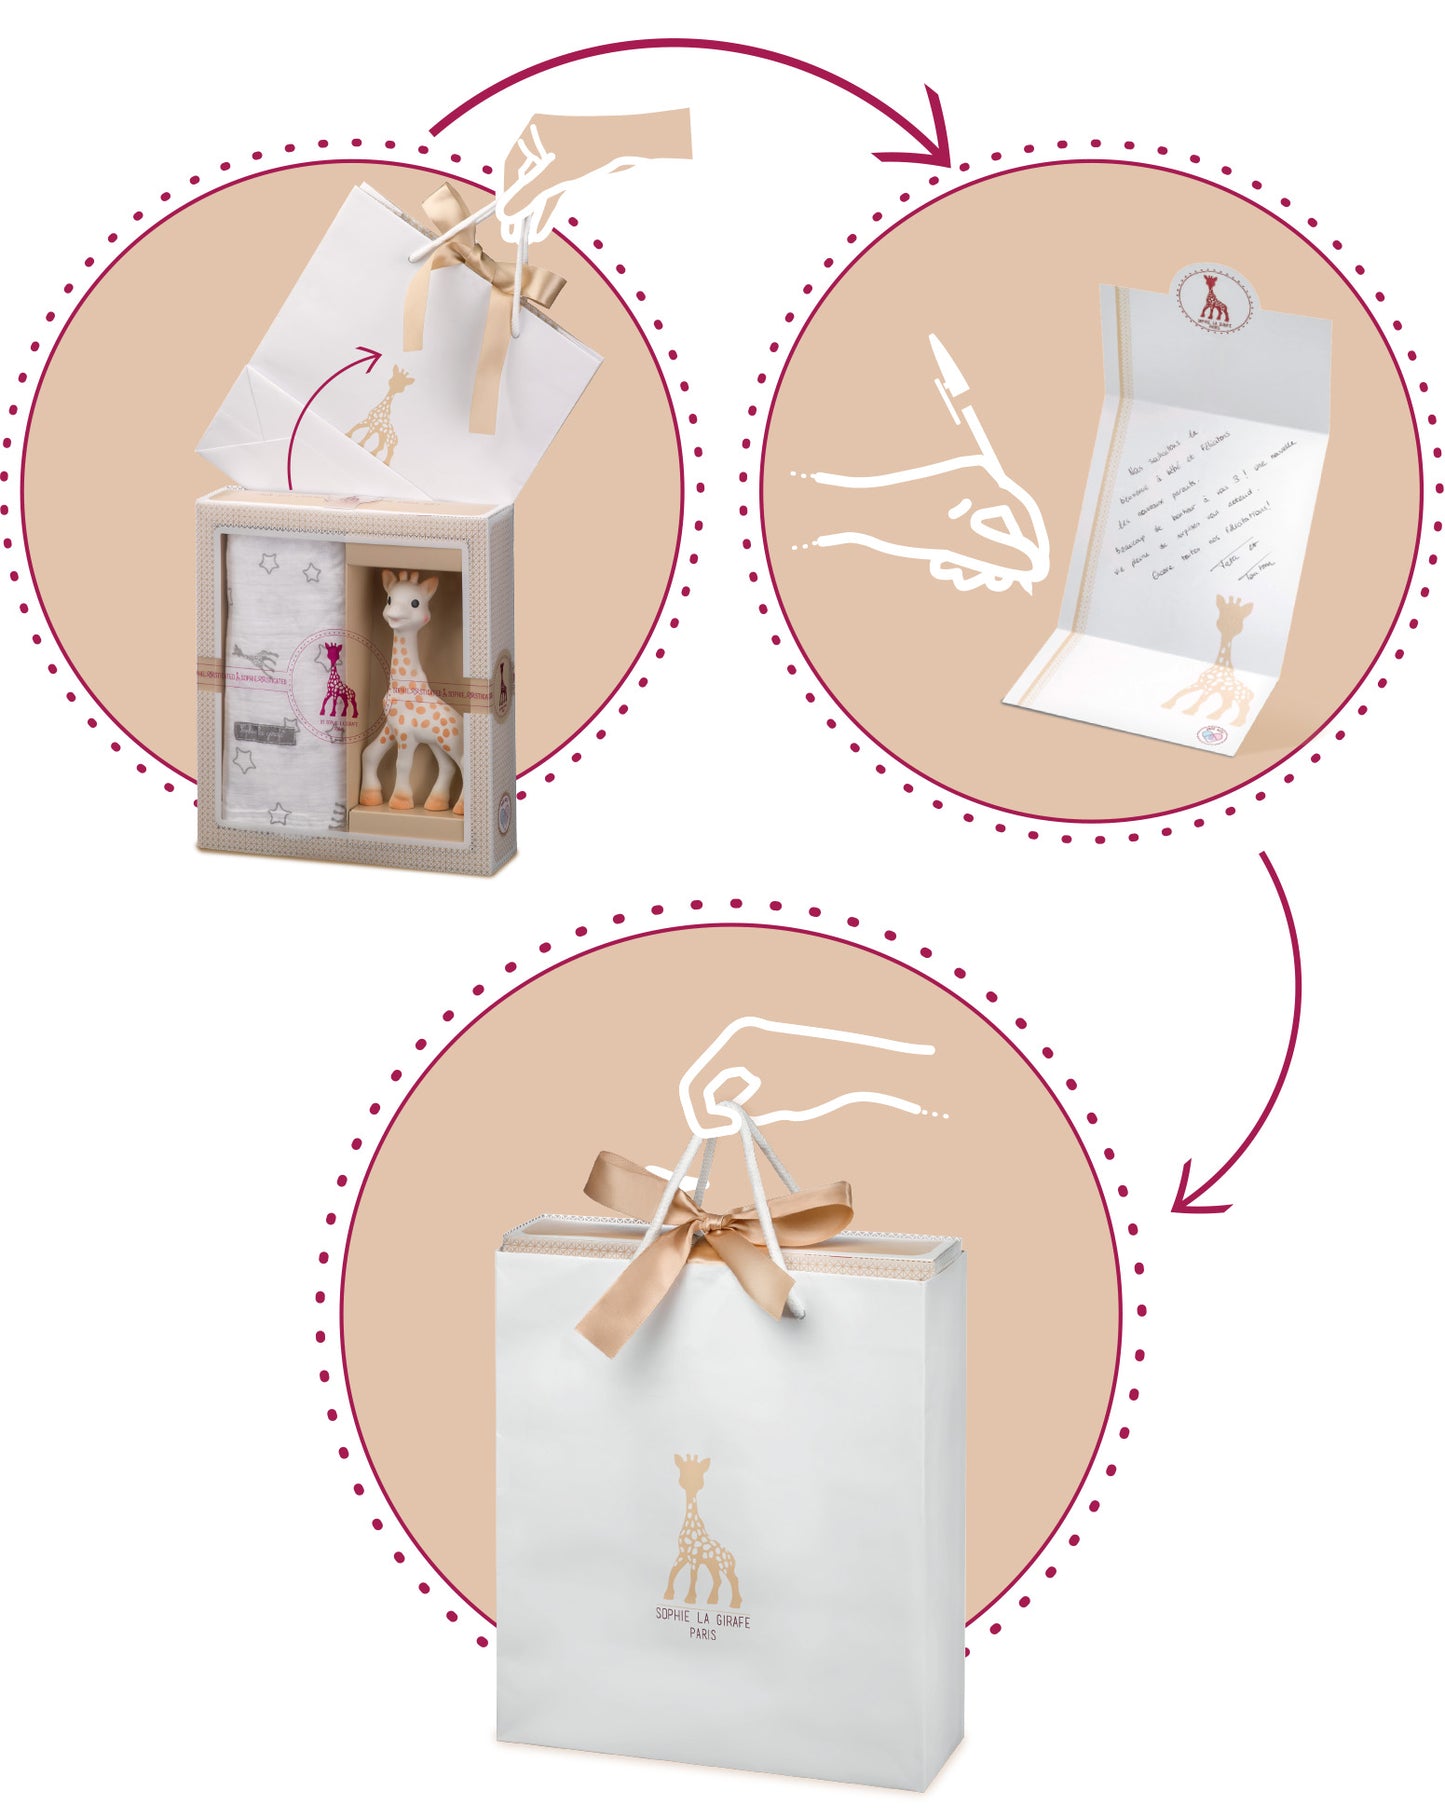 Load image into Gallery viewer, Sophie La Girafe Sophisticated - The I Love Sophie Gift Set
